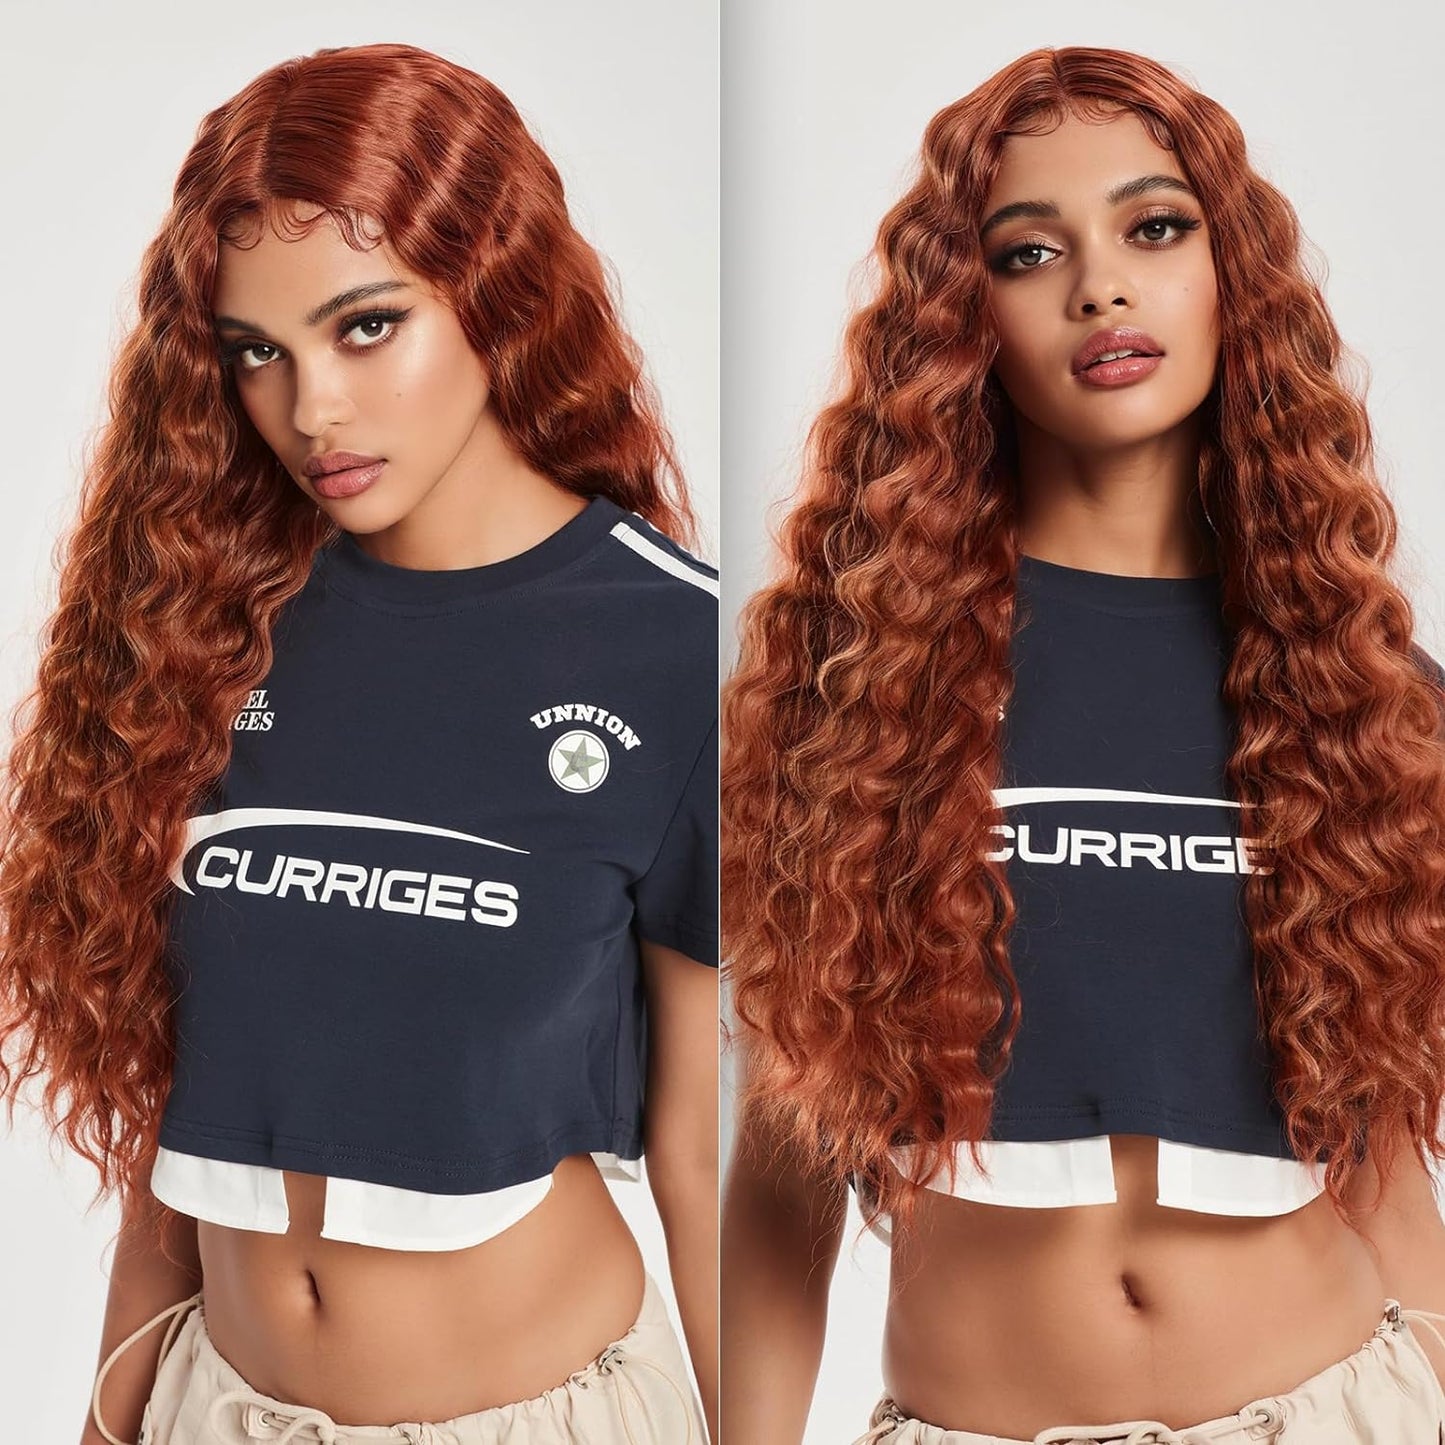 Long Deep Wave Wig,Ginger Reddish Brown Long Curly Synthetic Hair Wigs,Loose Deep Wave Wig,Lace Front Wigs for Women with Babyhair Crimps Curls Hair Replacement Wigs for Daily Party Use 28"